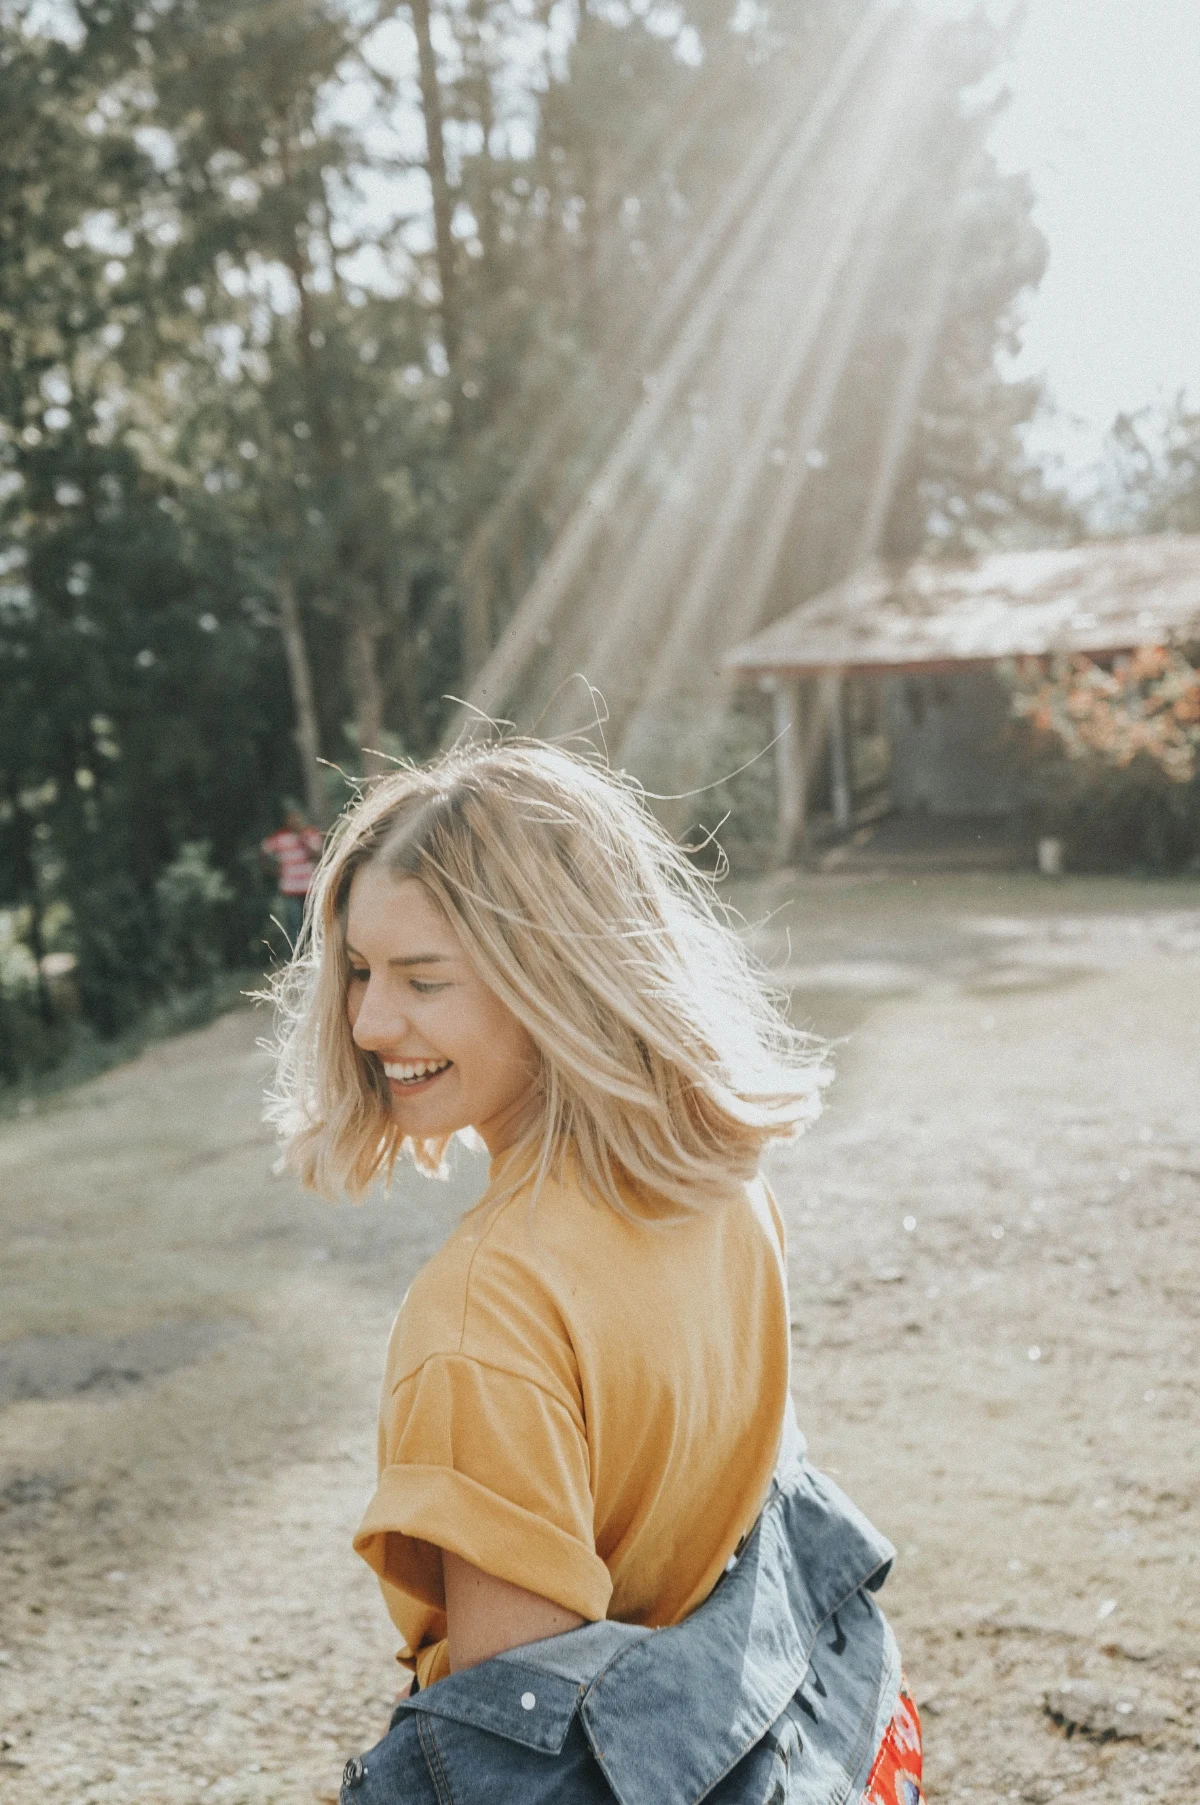 What does it truly mean to be a confident woman? Not a woman that just looks confident on the outside, but one that is actually confident on the inside. Here are 15 signs of a truly confident woman that you can adopt today.